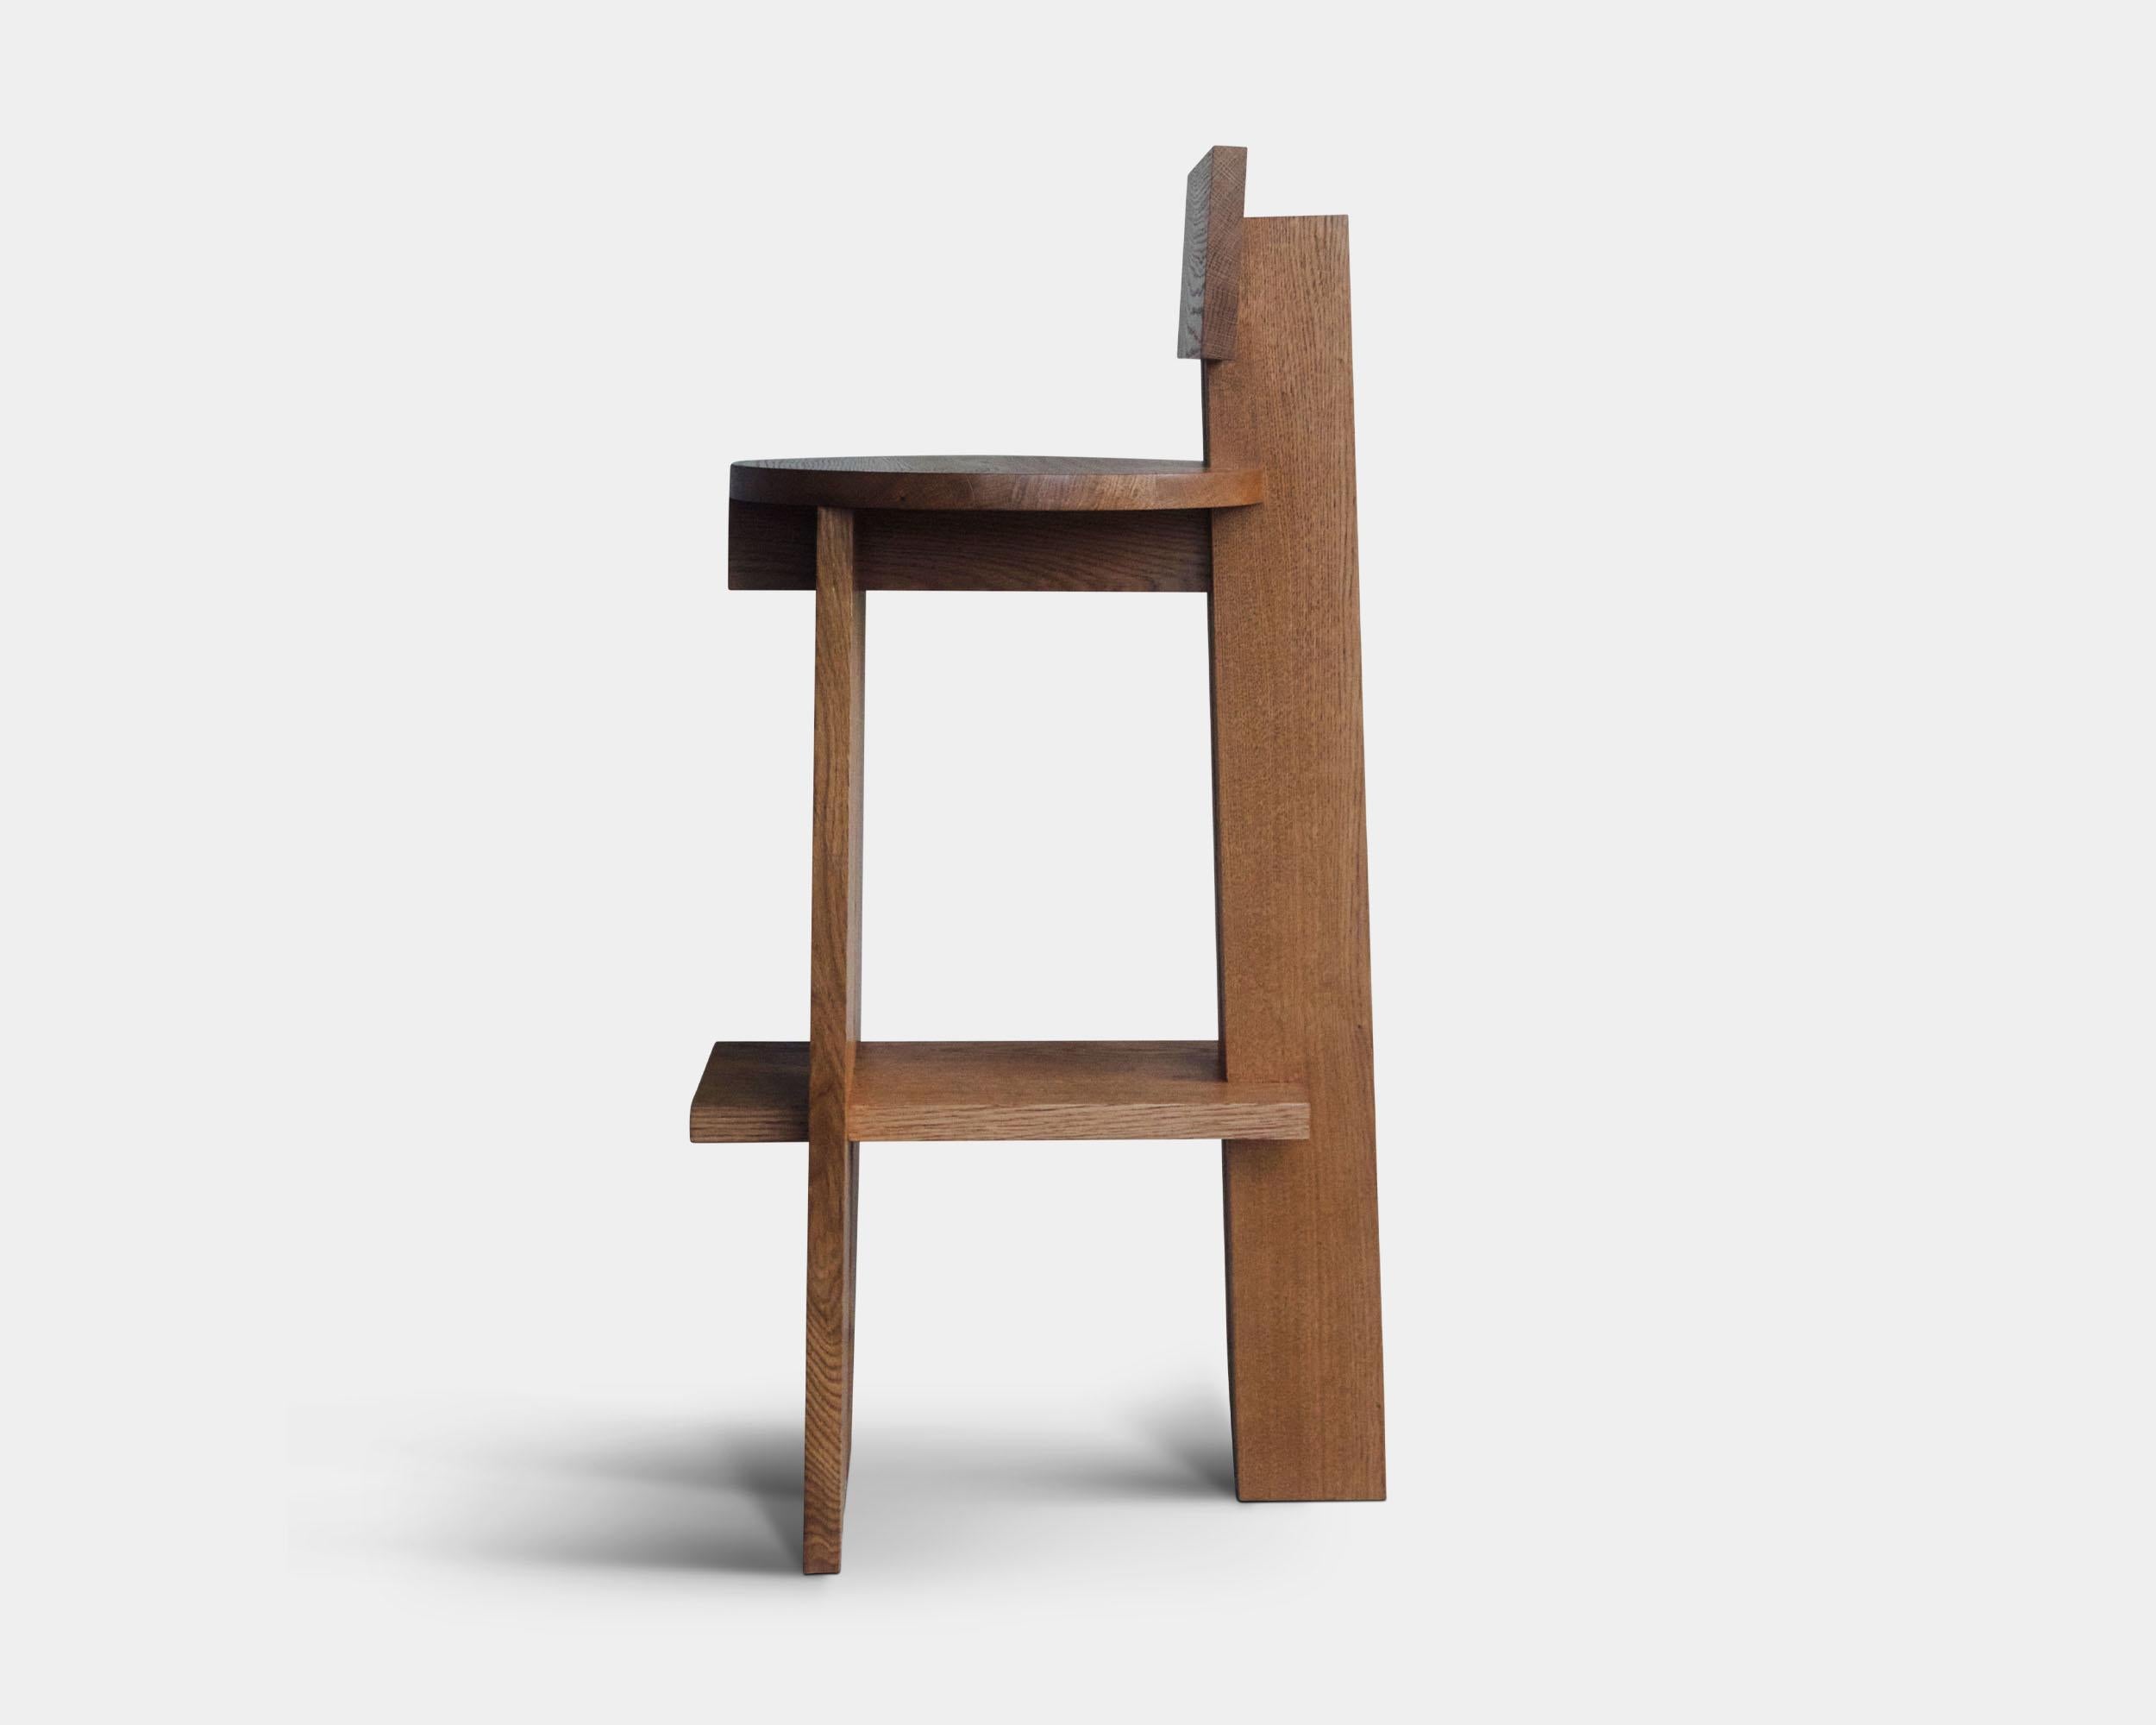 TR Bar Stool by Fora Projects 
Designed by Theresa Rand

Material: Oak wood
Color: Medium brown
Brown surface treatment with non-toxic hardwax oil

Dimensions:

H: 98, L: 41, W: 52 cm / Seat: 75 cm

_______________

The TR bar / counter stool was